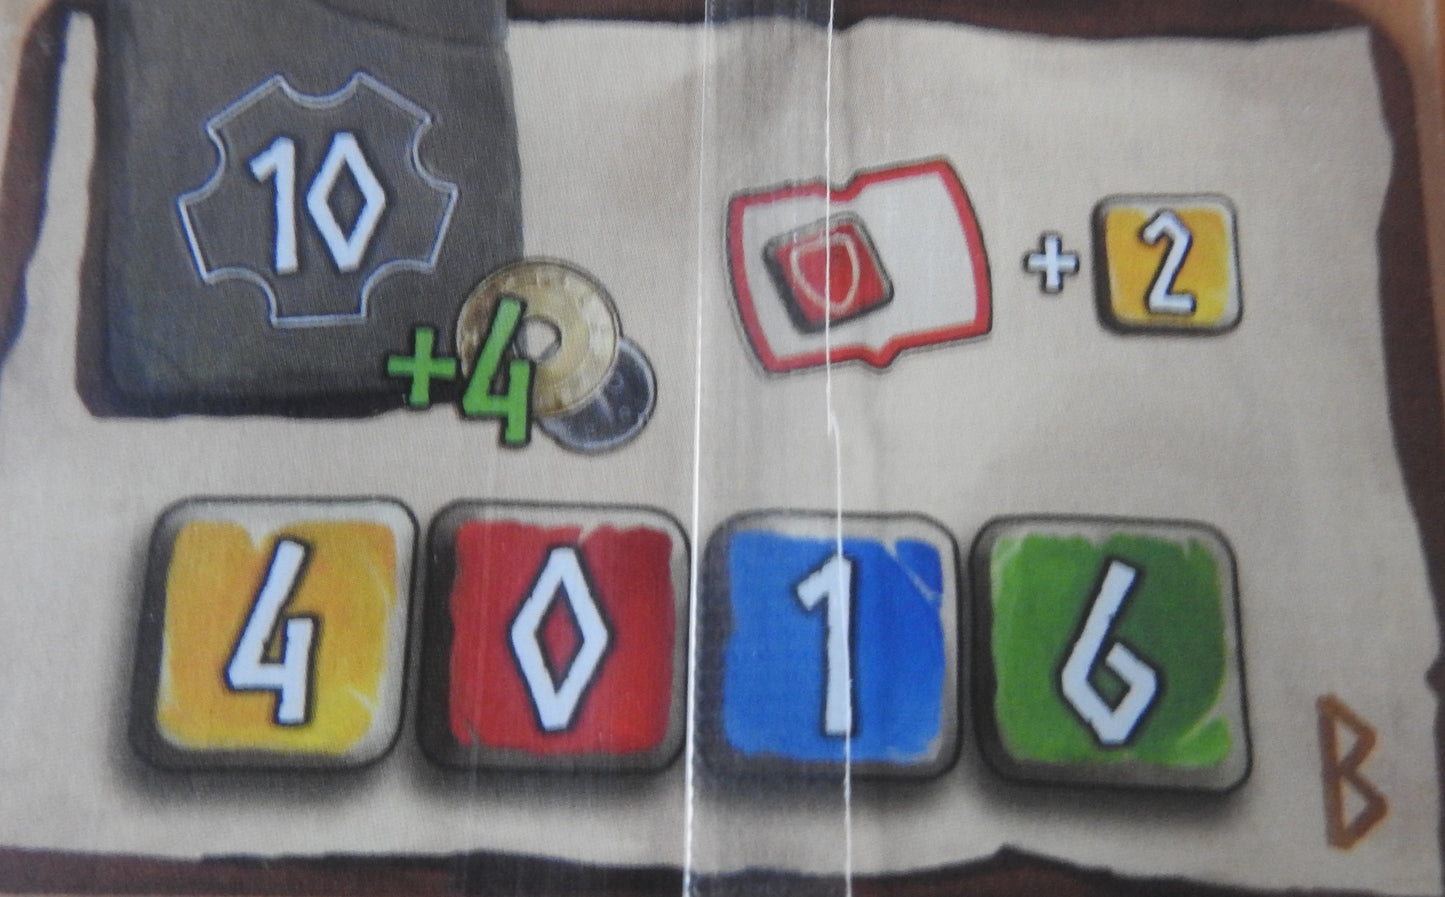 Close-up view of the 'B' start card showing the symbols and bonuses that aid players during the game.